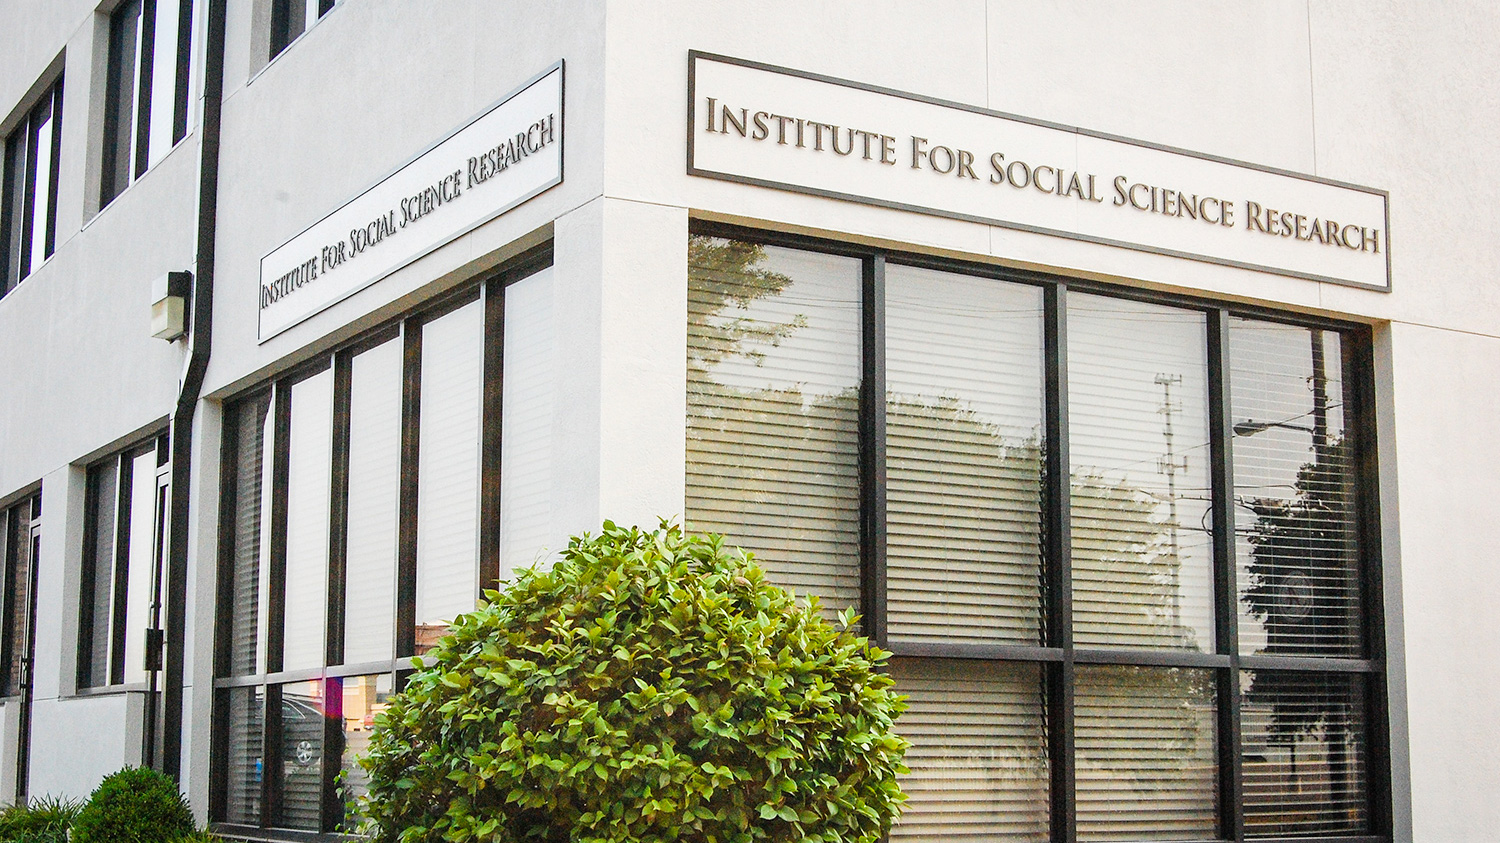 Institute for Social Science Research